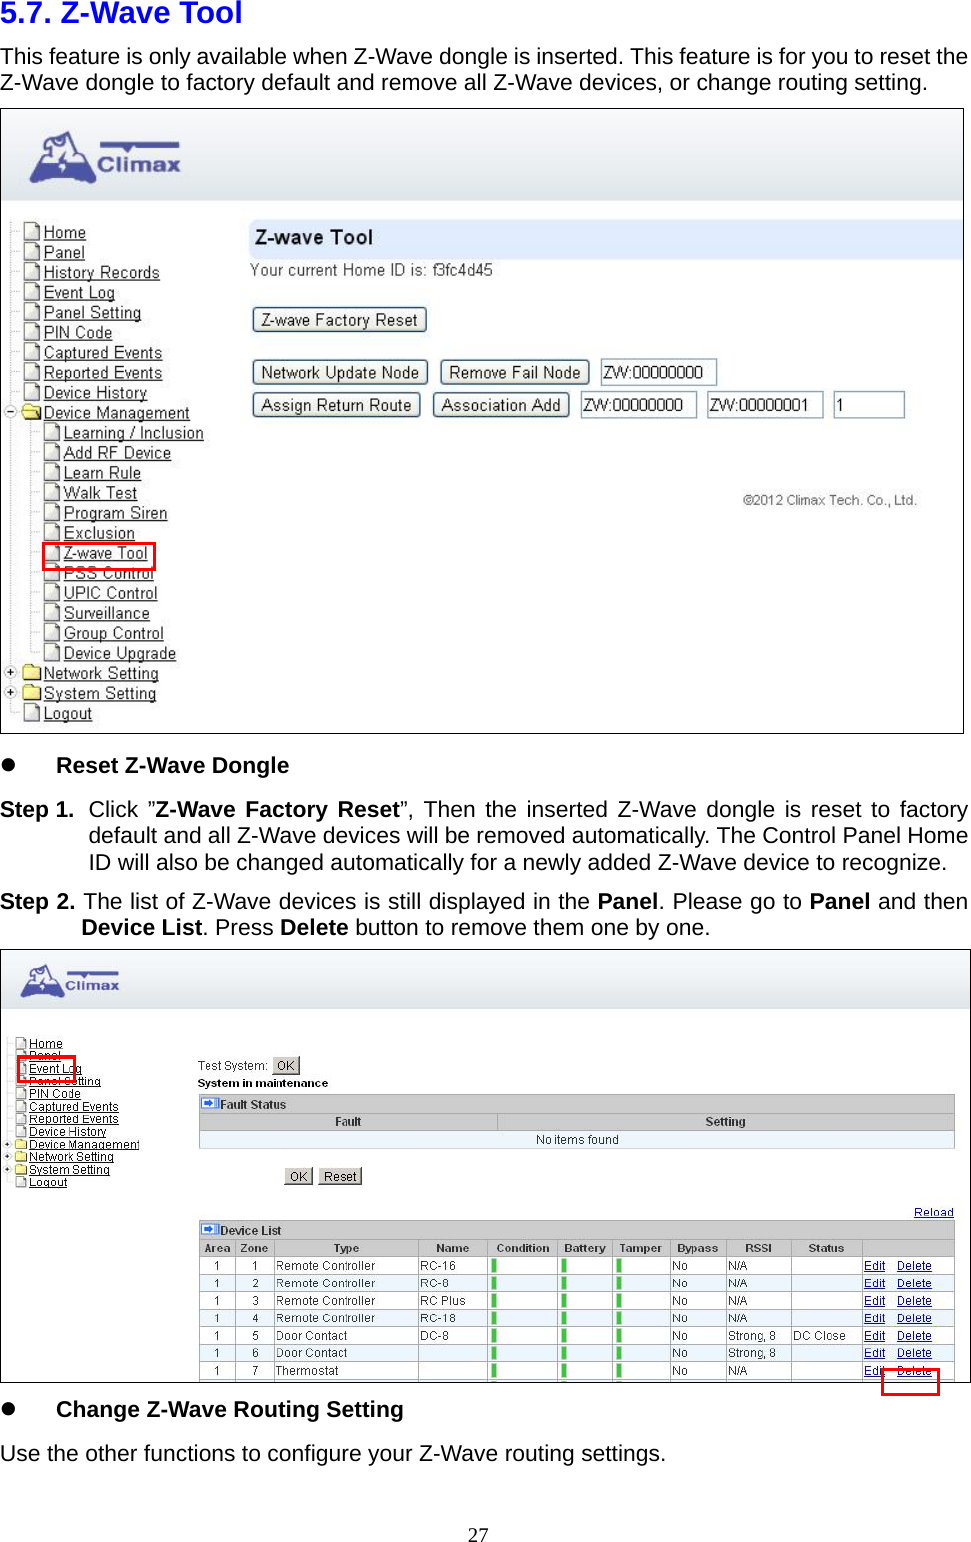  275.7. Z-Wave Tool     This feature is only available when Z-Wave dongle is inserted. This feature is for you to reset the Z-Wave dongle to factory default and remove all Z-Wave devices, or change routing setting.   Reset Z-Wave Dongle Step 1.  Click ”Z-Wave Factory Reset”, Then the inserted Z-Wave dongle is reset to factory default and all Z-Wave devices will be removed automatically. The Control Panel Home ID will also be changed automatically for a newly added Z-Wave device to recognize. Step 2. The list of Z-Wave devices is still displayed in the Panel. Please go to Panel and then Device List. Press Delete button to remove them one by one.     Change Z-Wave Routing Setting Use the other functions to configure your Z-Wave routing settings. 